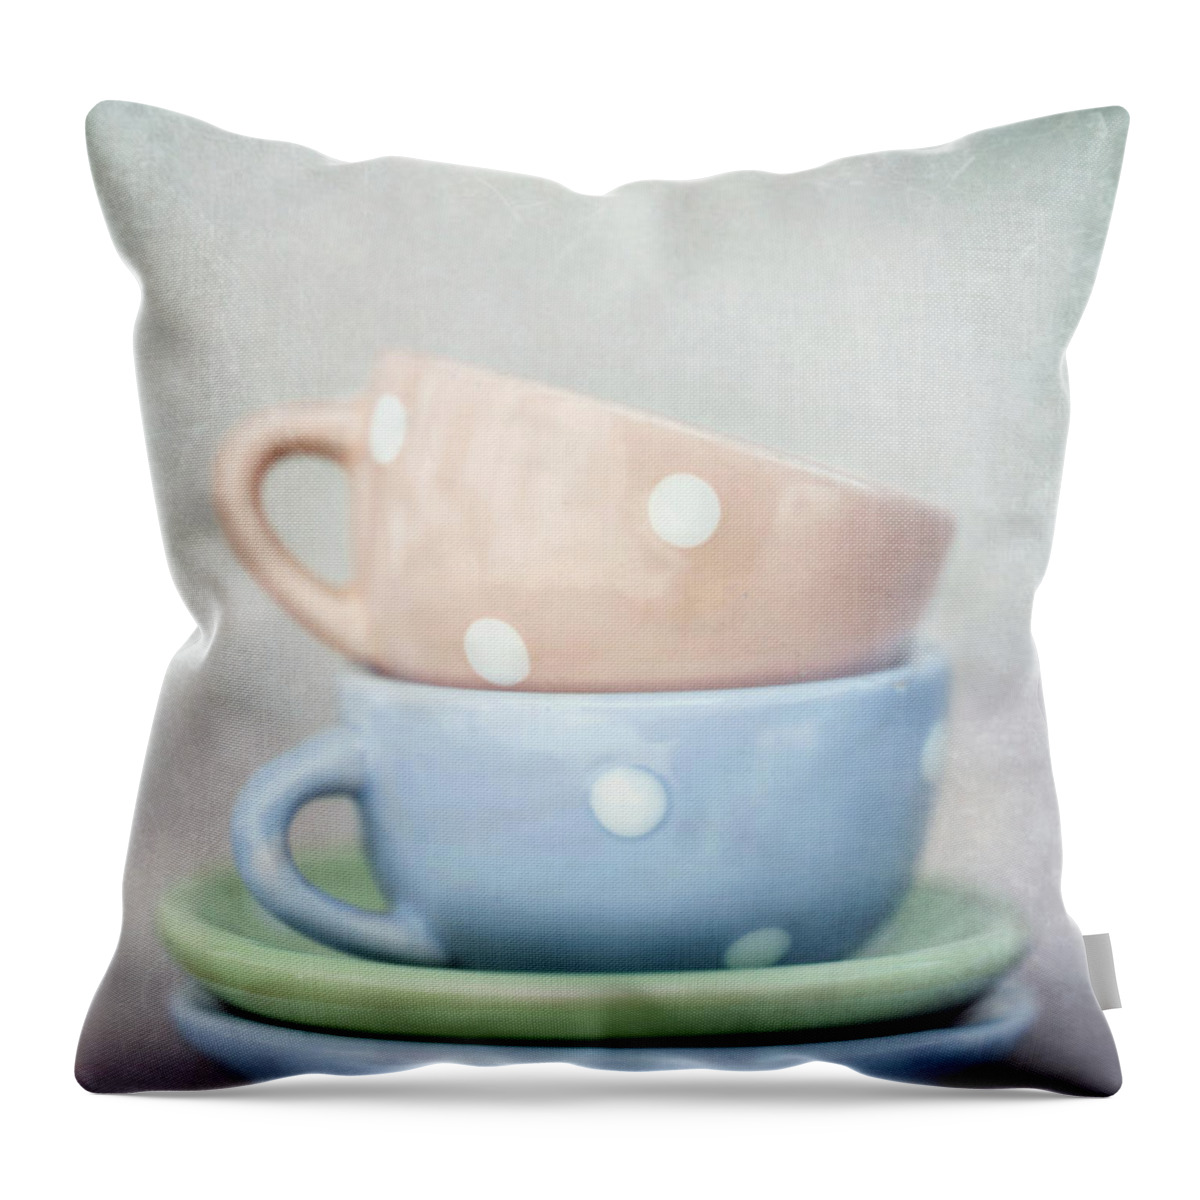 Cup Throw Pillow featuring the photograph Dolls China by Priska Wettstein